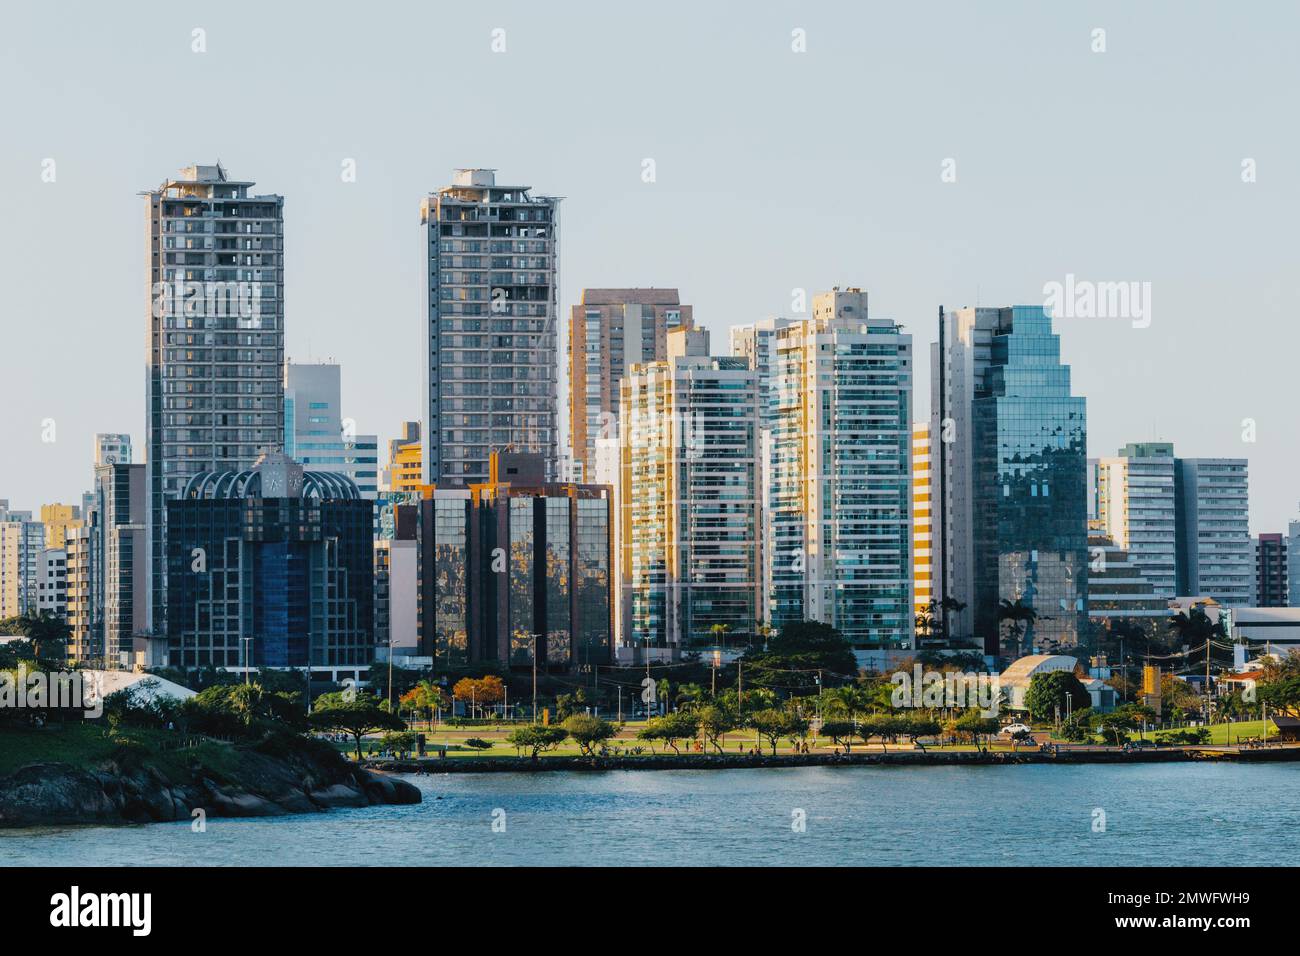 A river with modern skyscrapers in the background, Vitoria, Brazil Stock Photo